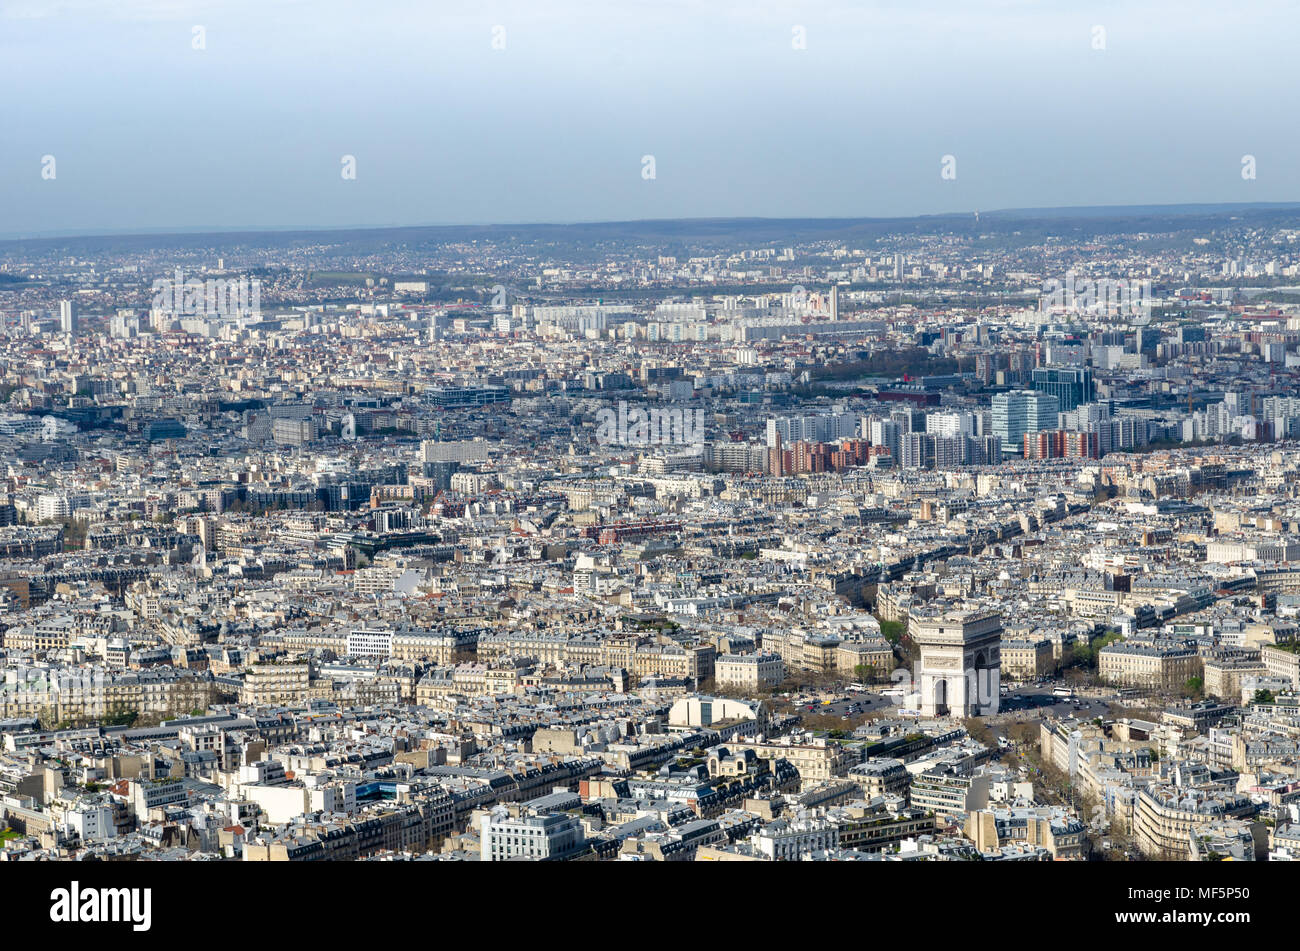 View of the city of Paris, including the Arc de Triomphe, from the Eiffel Tower, France Stock Photo